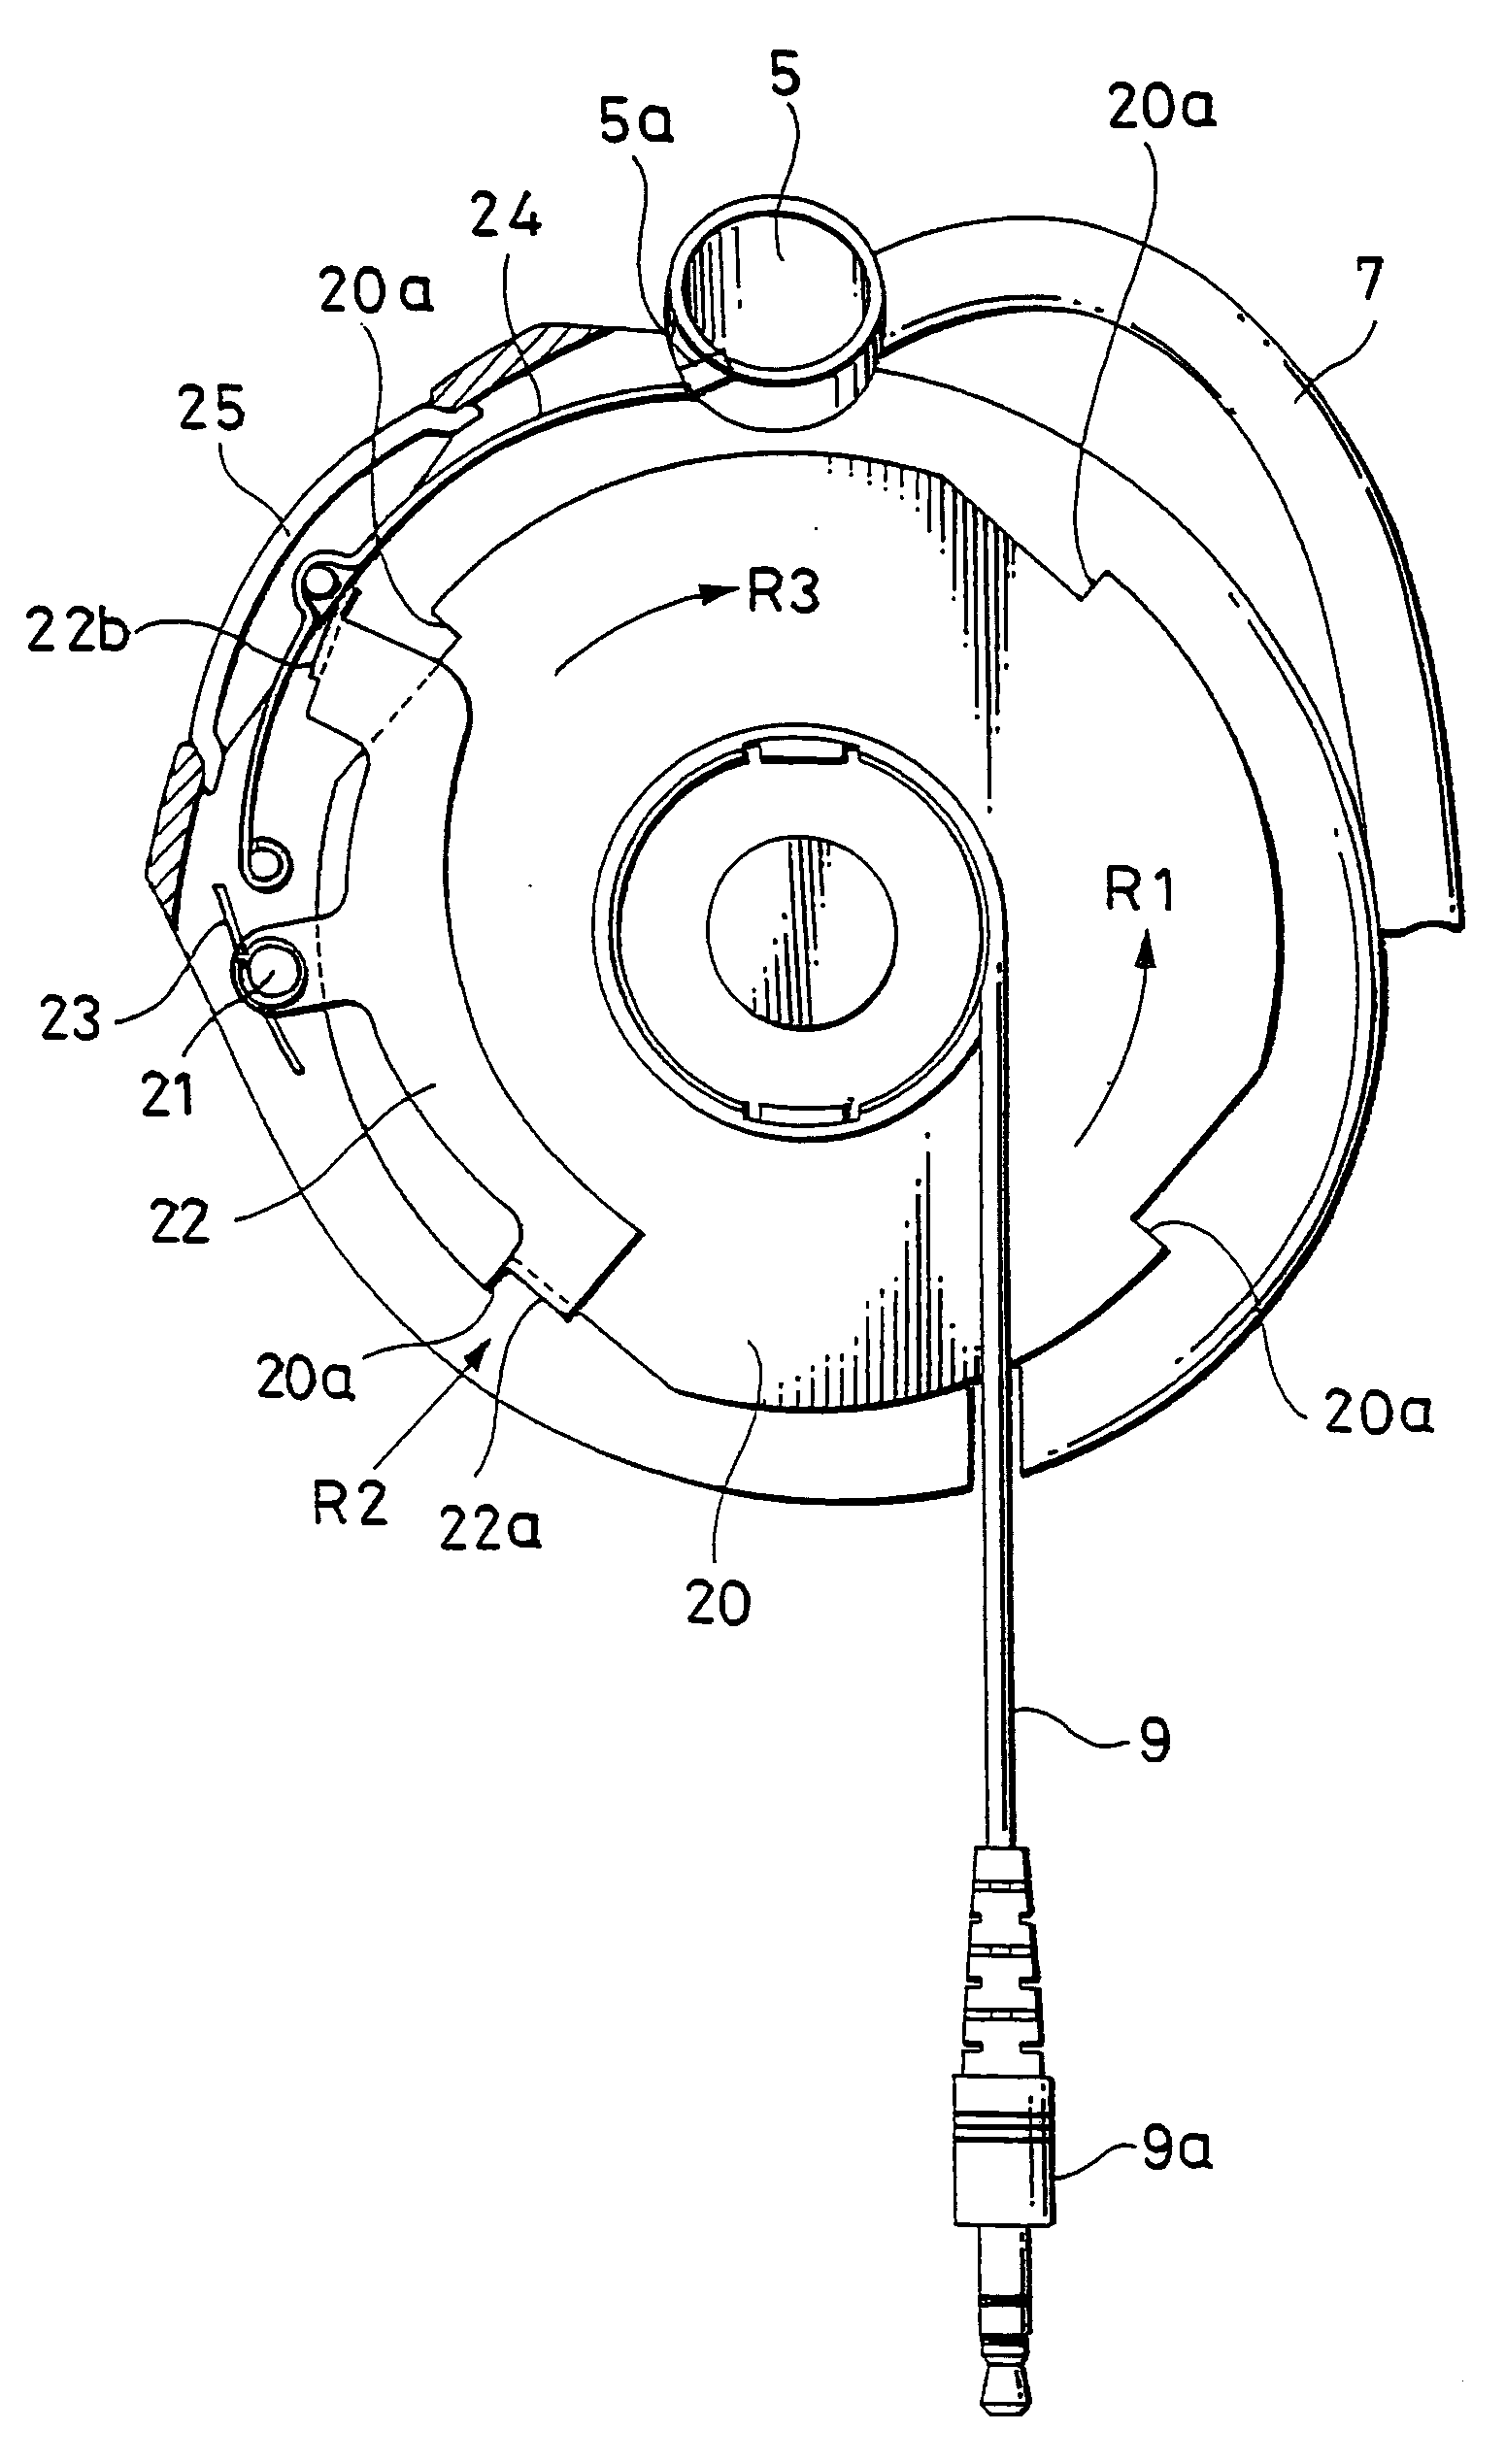 Headphone with cord take-up device